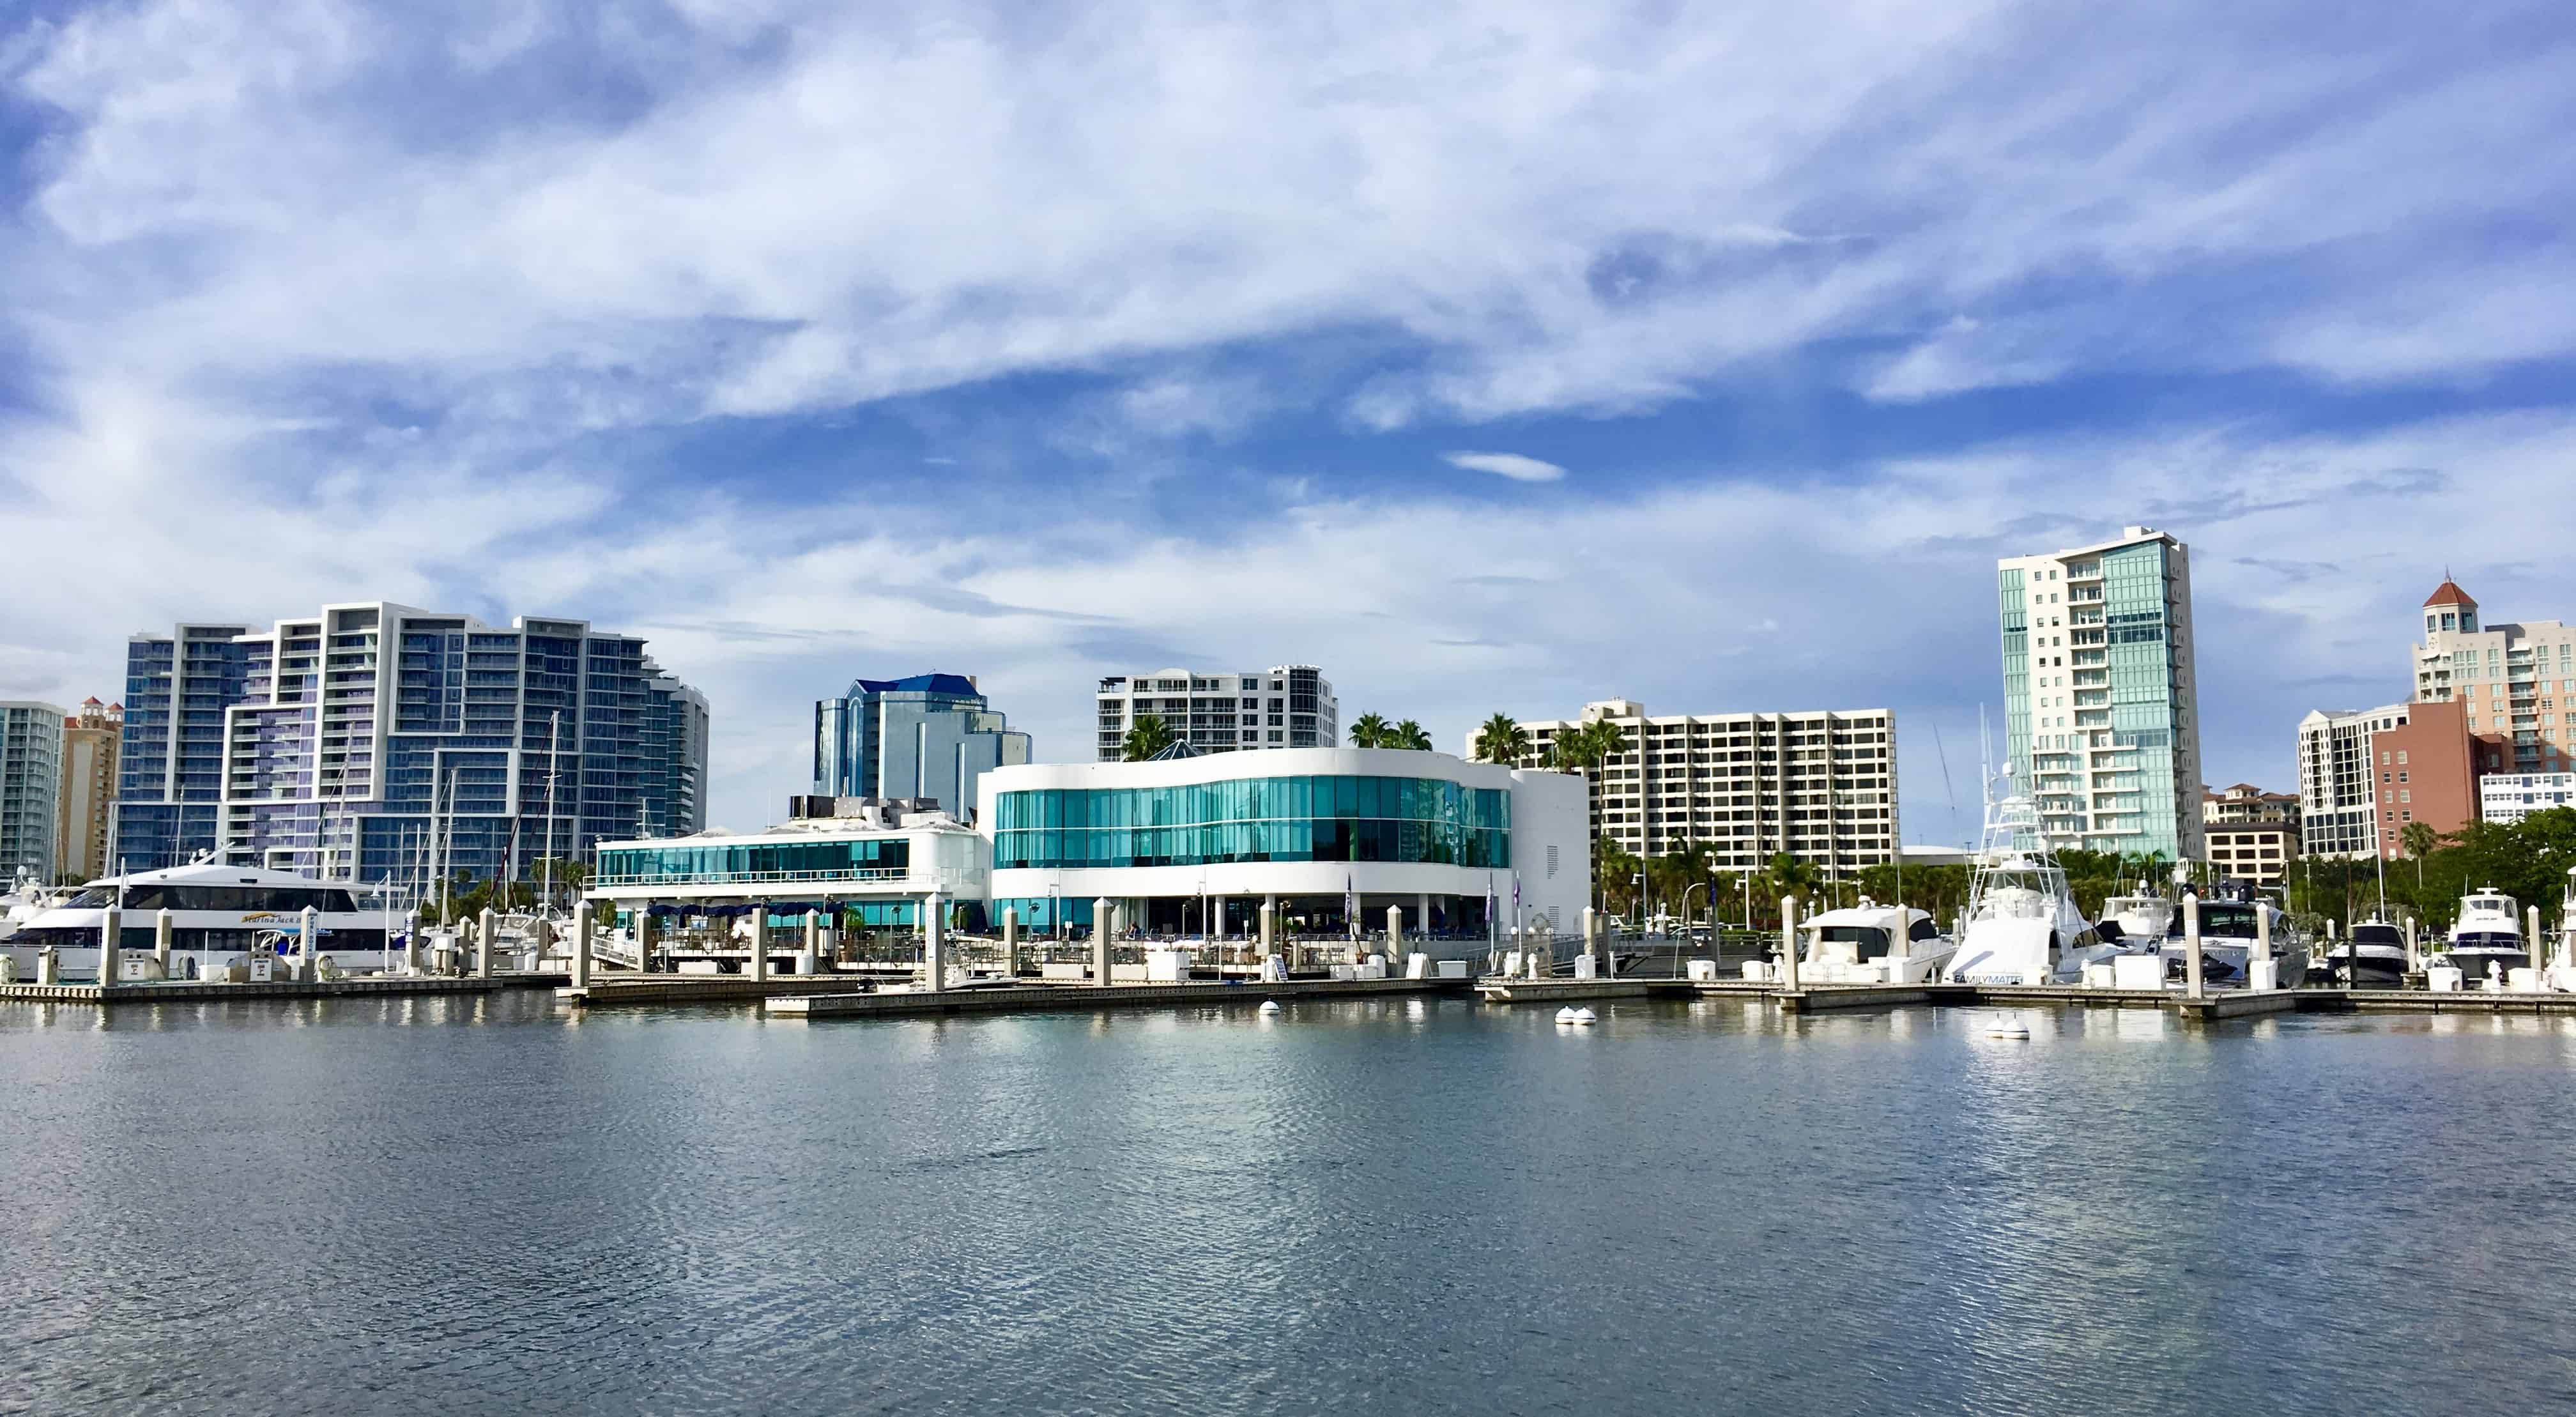 7 Reasons To Visit Sarasota - Home of the #1 Beach in the U.S.A., there's something for everyone here! | Tastefulventure.com made in partnership with @creditcards.com #CreditCardWin #sponsored